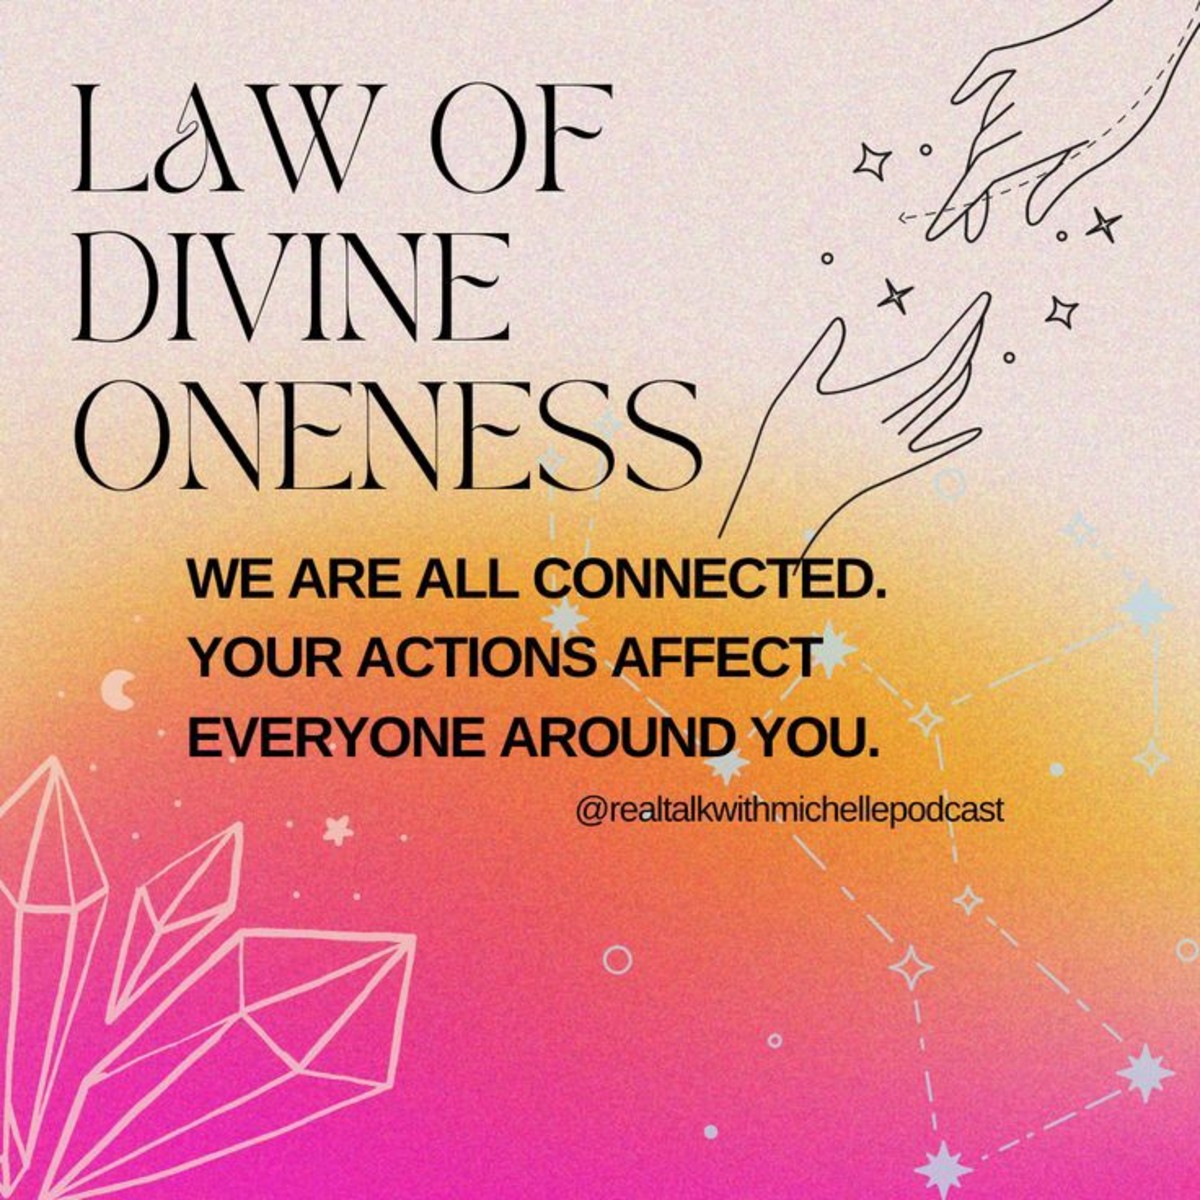 12 Universal Laws: The Law of Divine Oneness